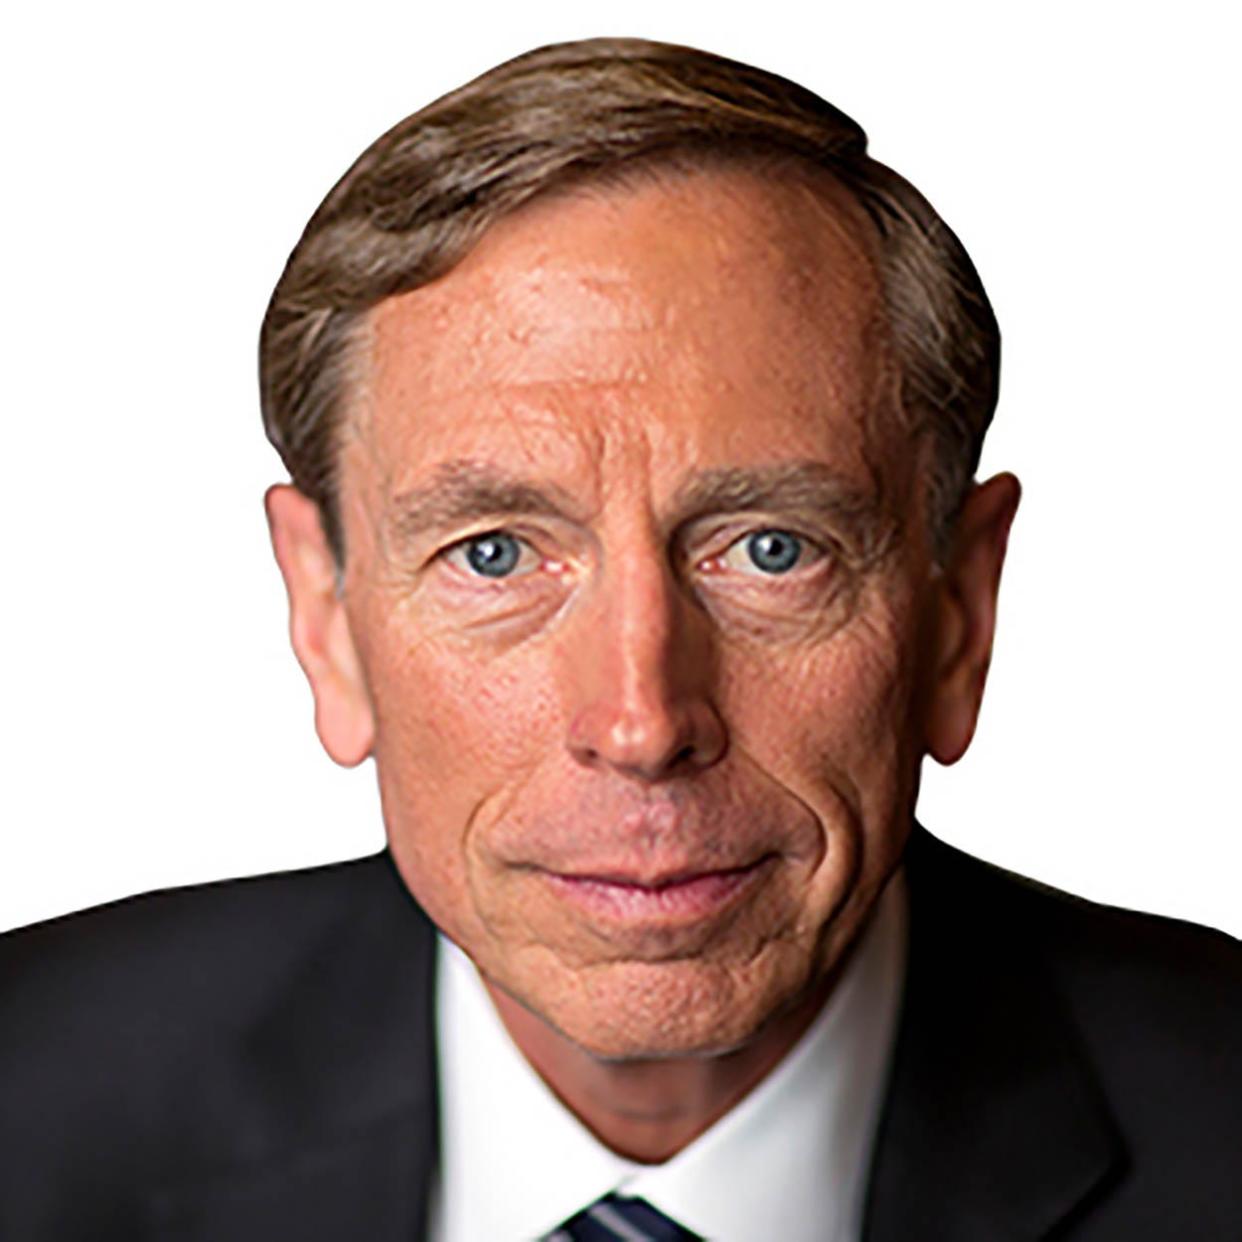 Retired Gen. David Petraeus will give a talk called "American Leadership in the World" on Jan. 10 at the Society of the Four Arts.